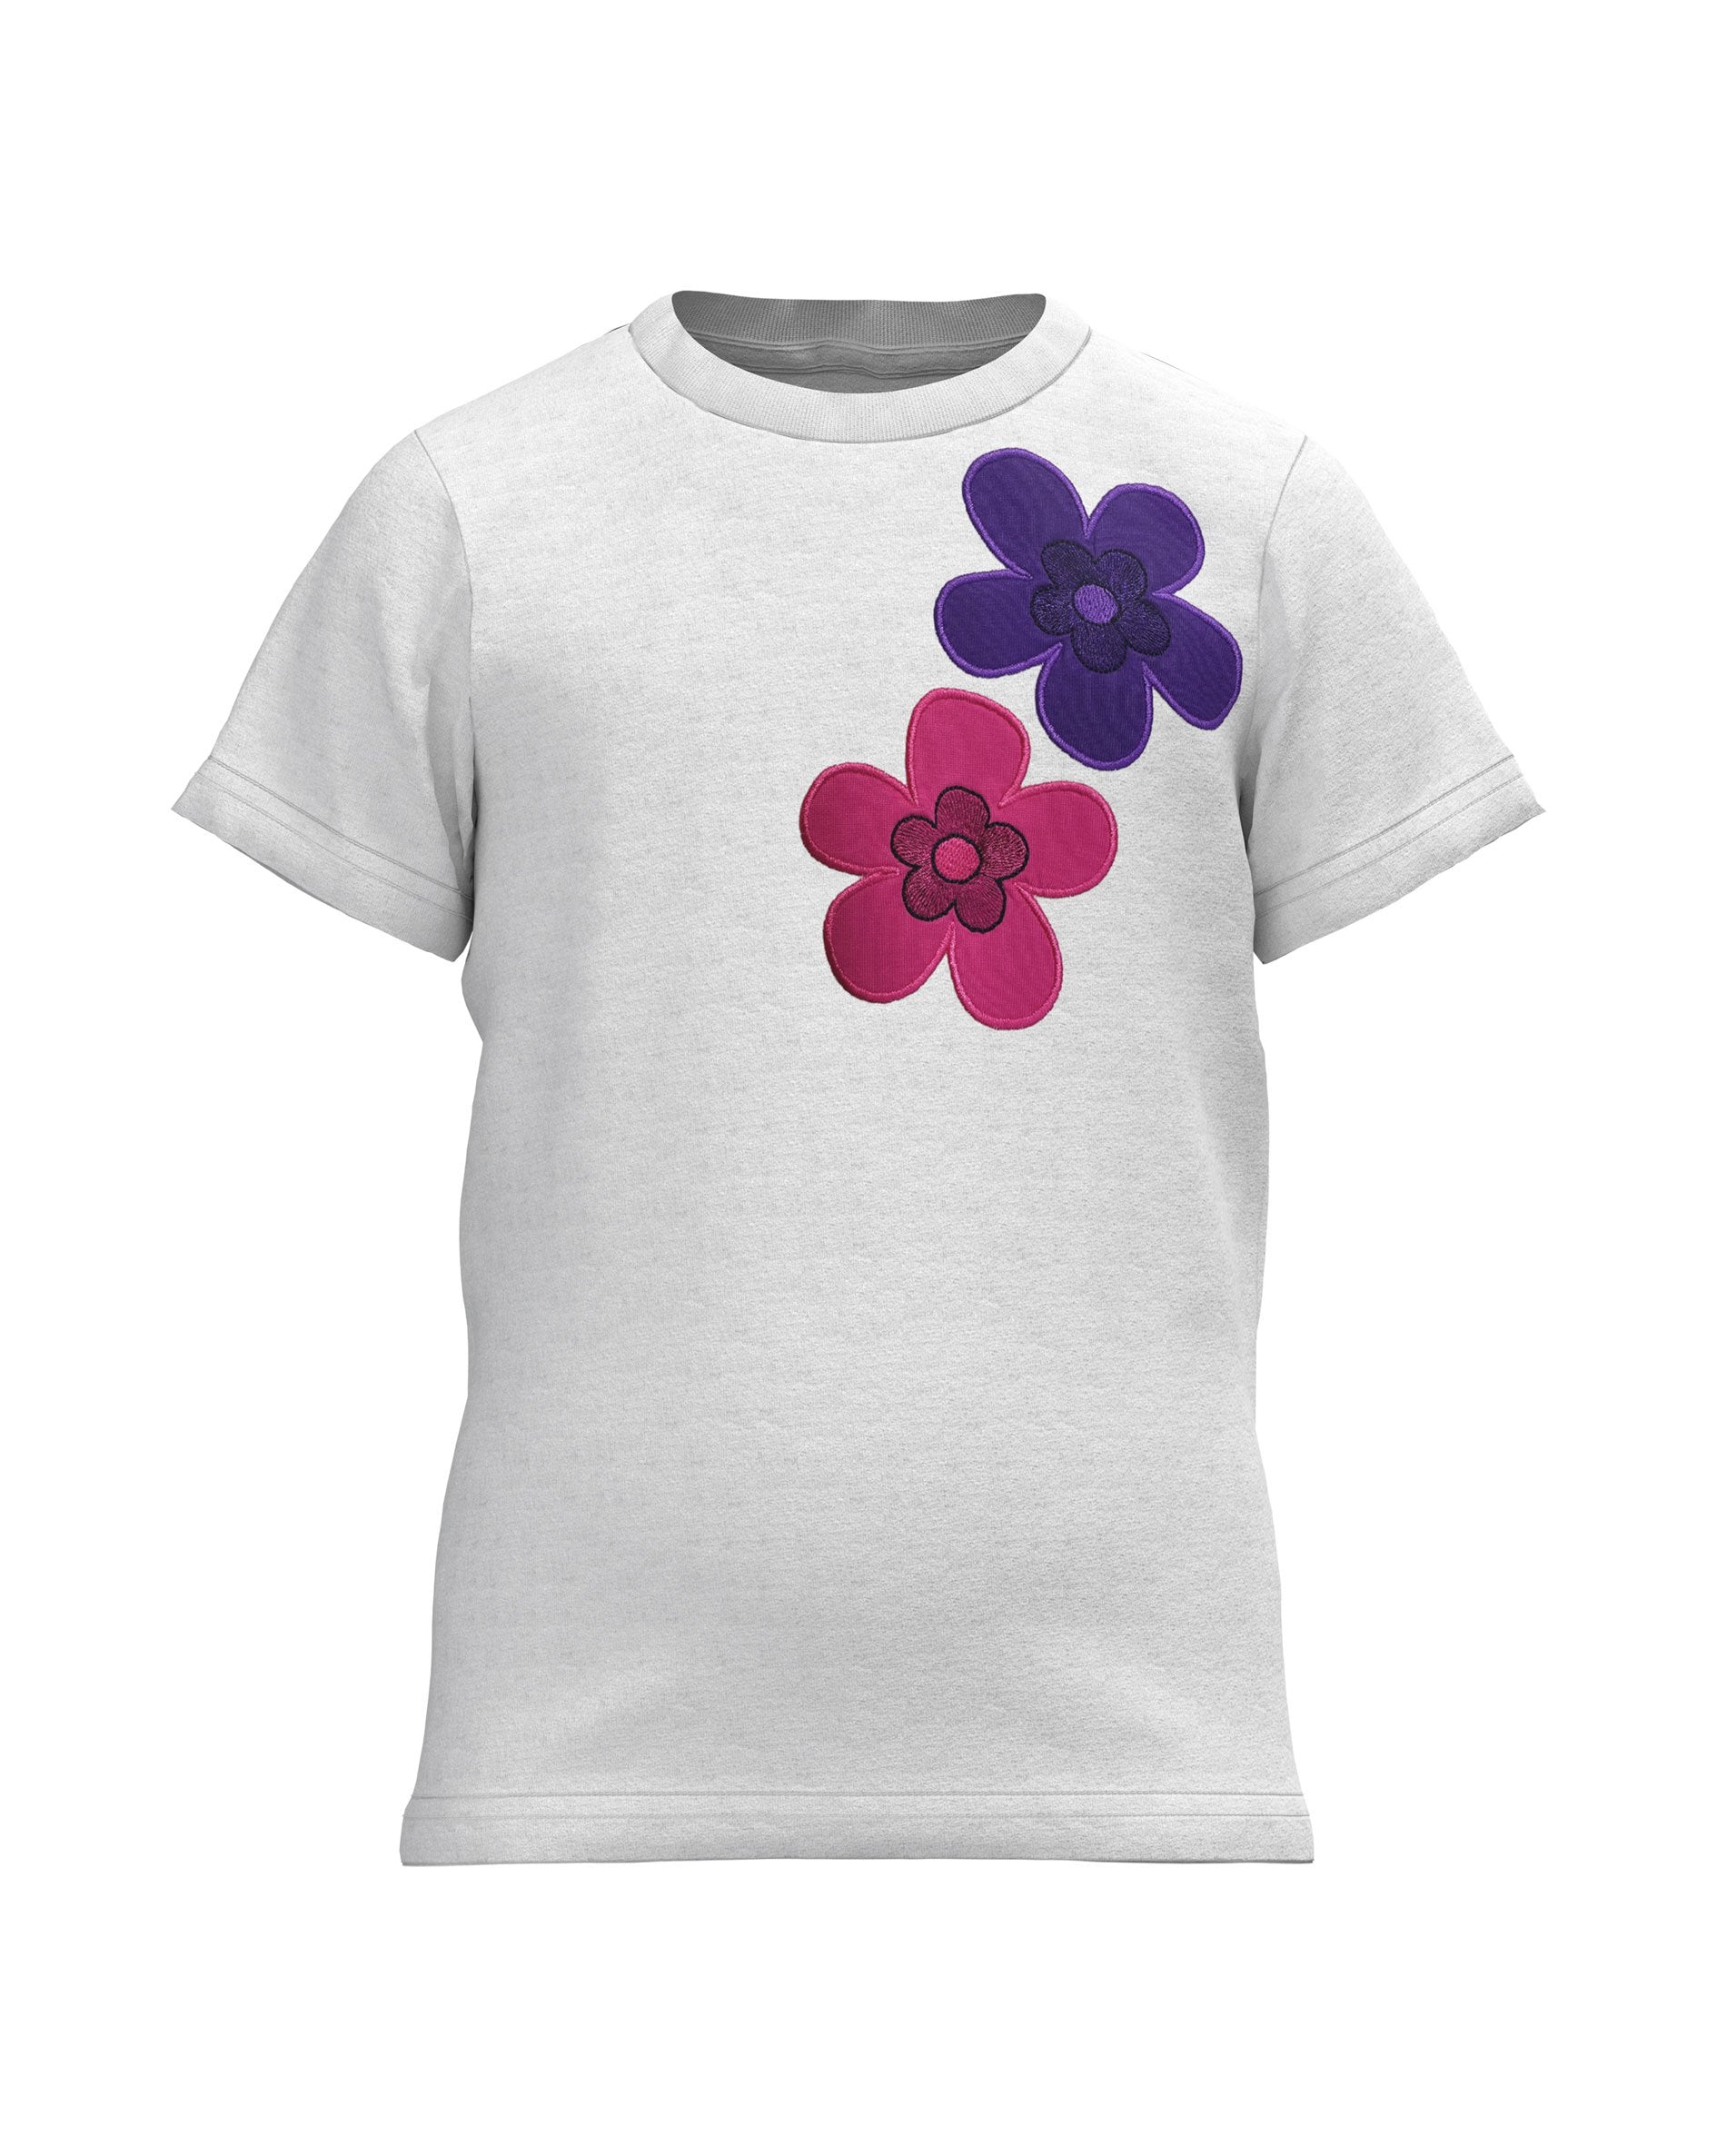 Tops Girls – Cotonly and T-shirts School